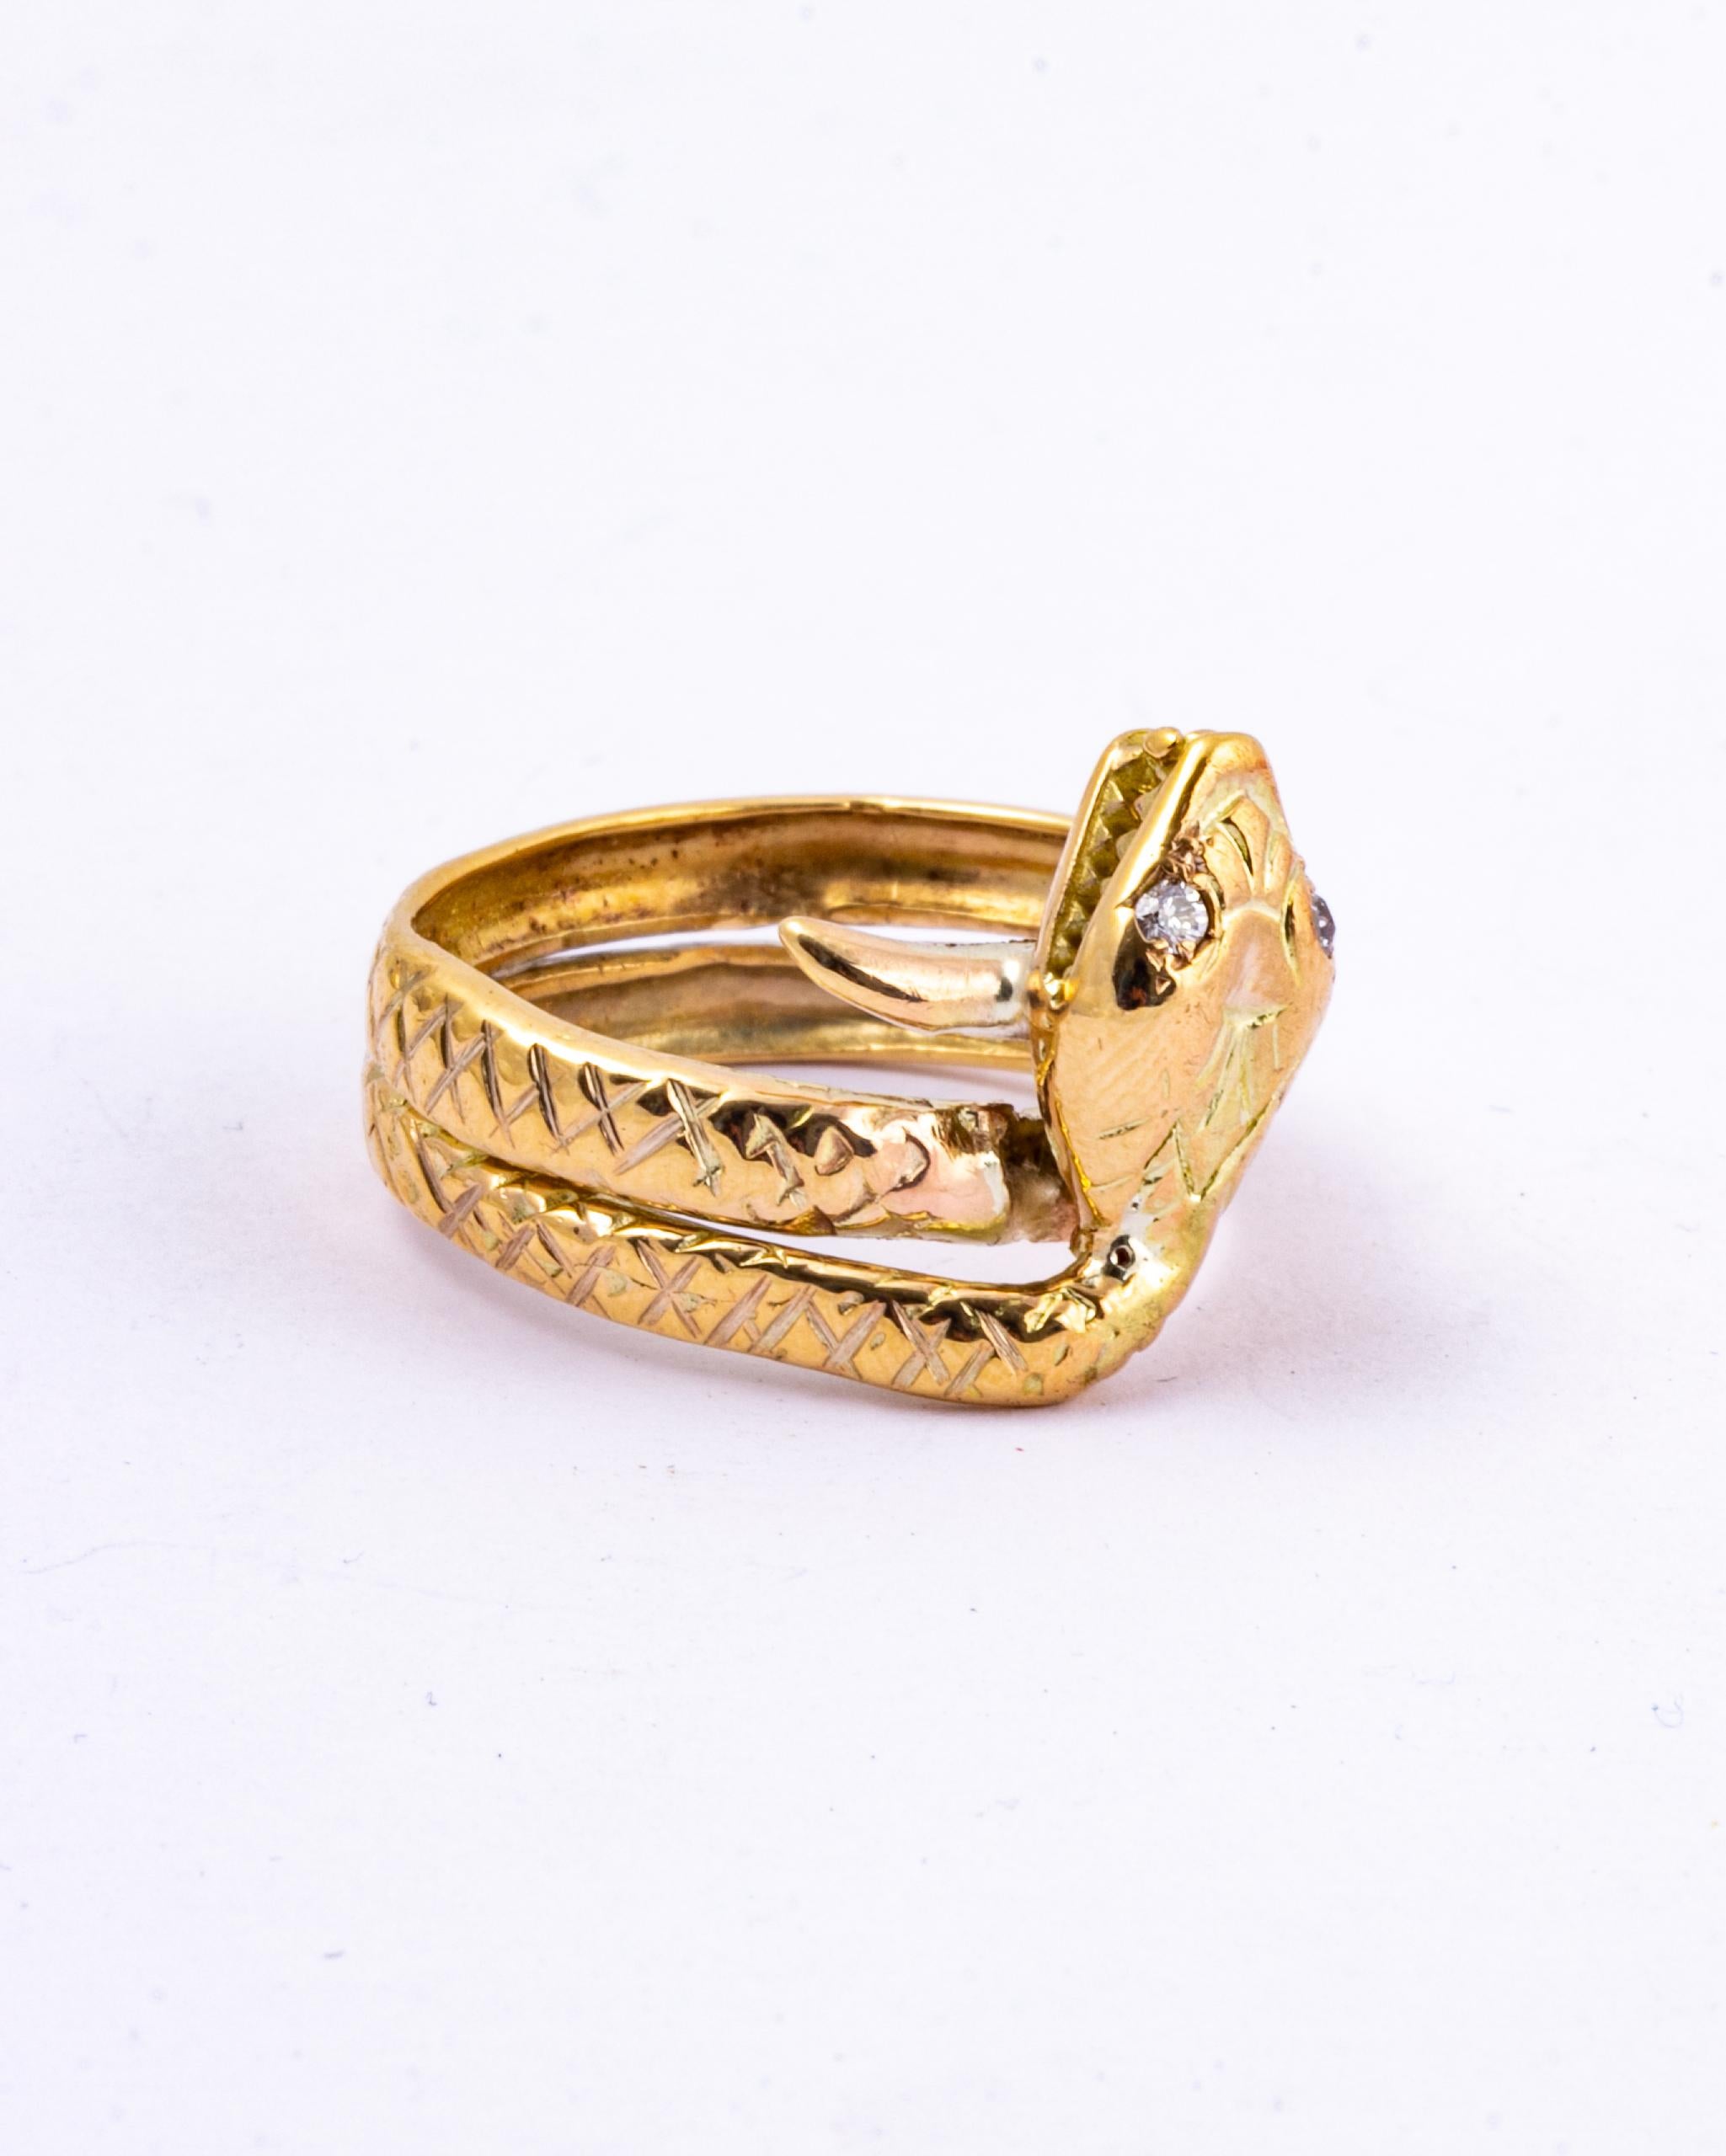 The stunning snake design of this ring is fantastic and has so much detail. It coils around the finger with a textured tail and diamond set eyes. The diamonds measure approx 5pts each and are bright and sparkly. 

Ring Size: Q or 8 
Widest Point: